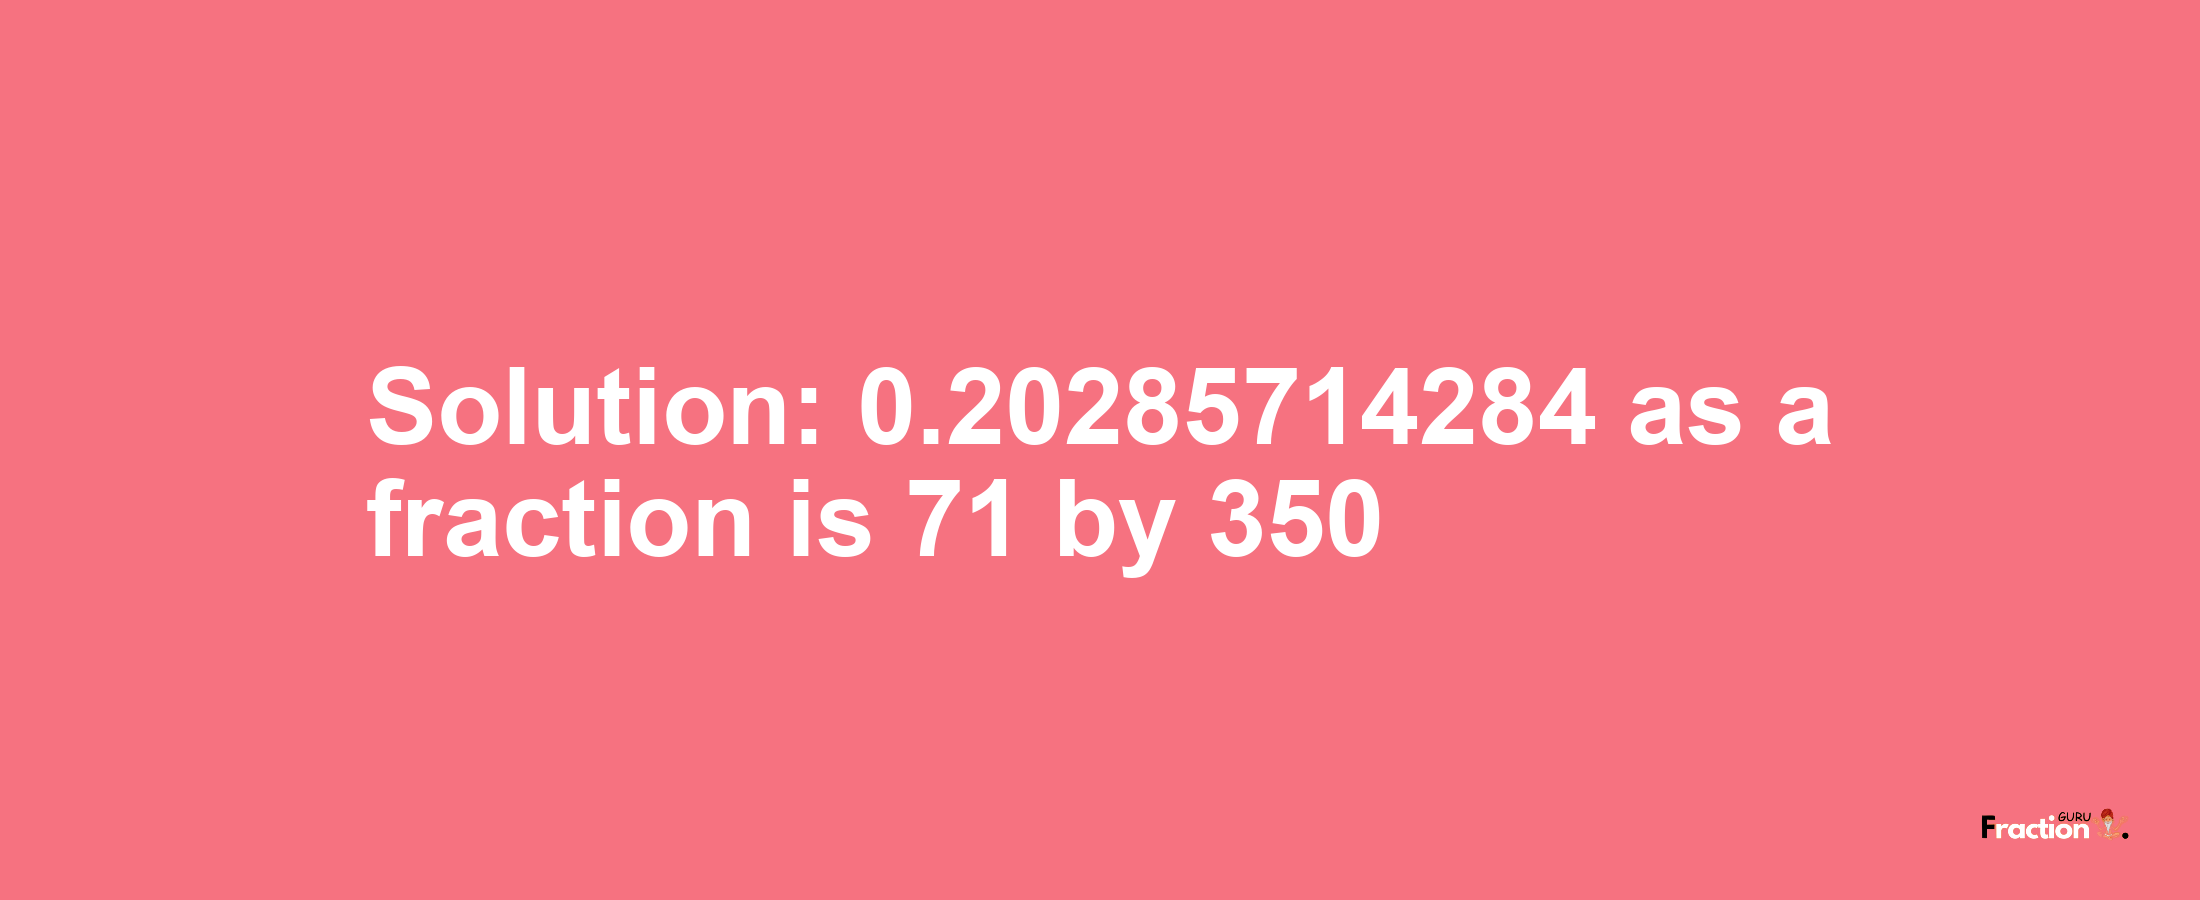 Solution:0.20285714284 as a fraction is 71/350